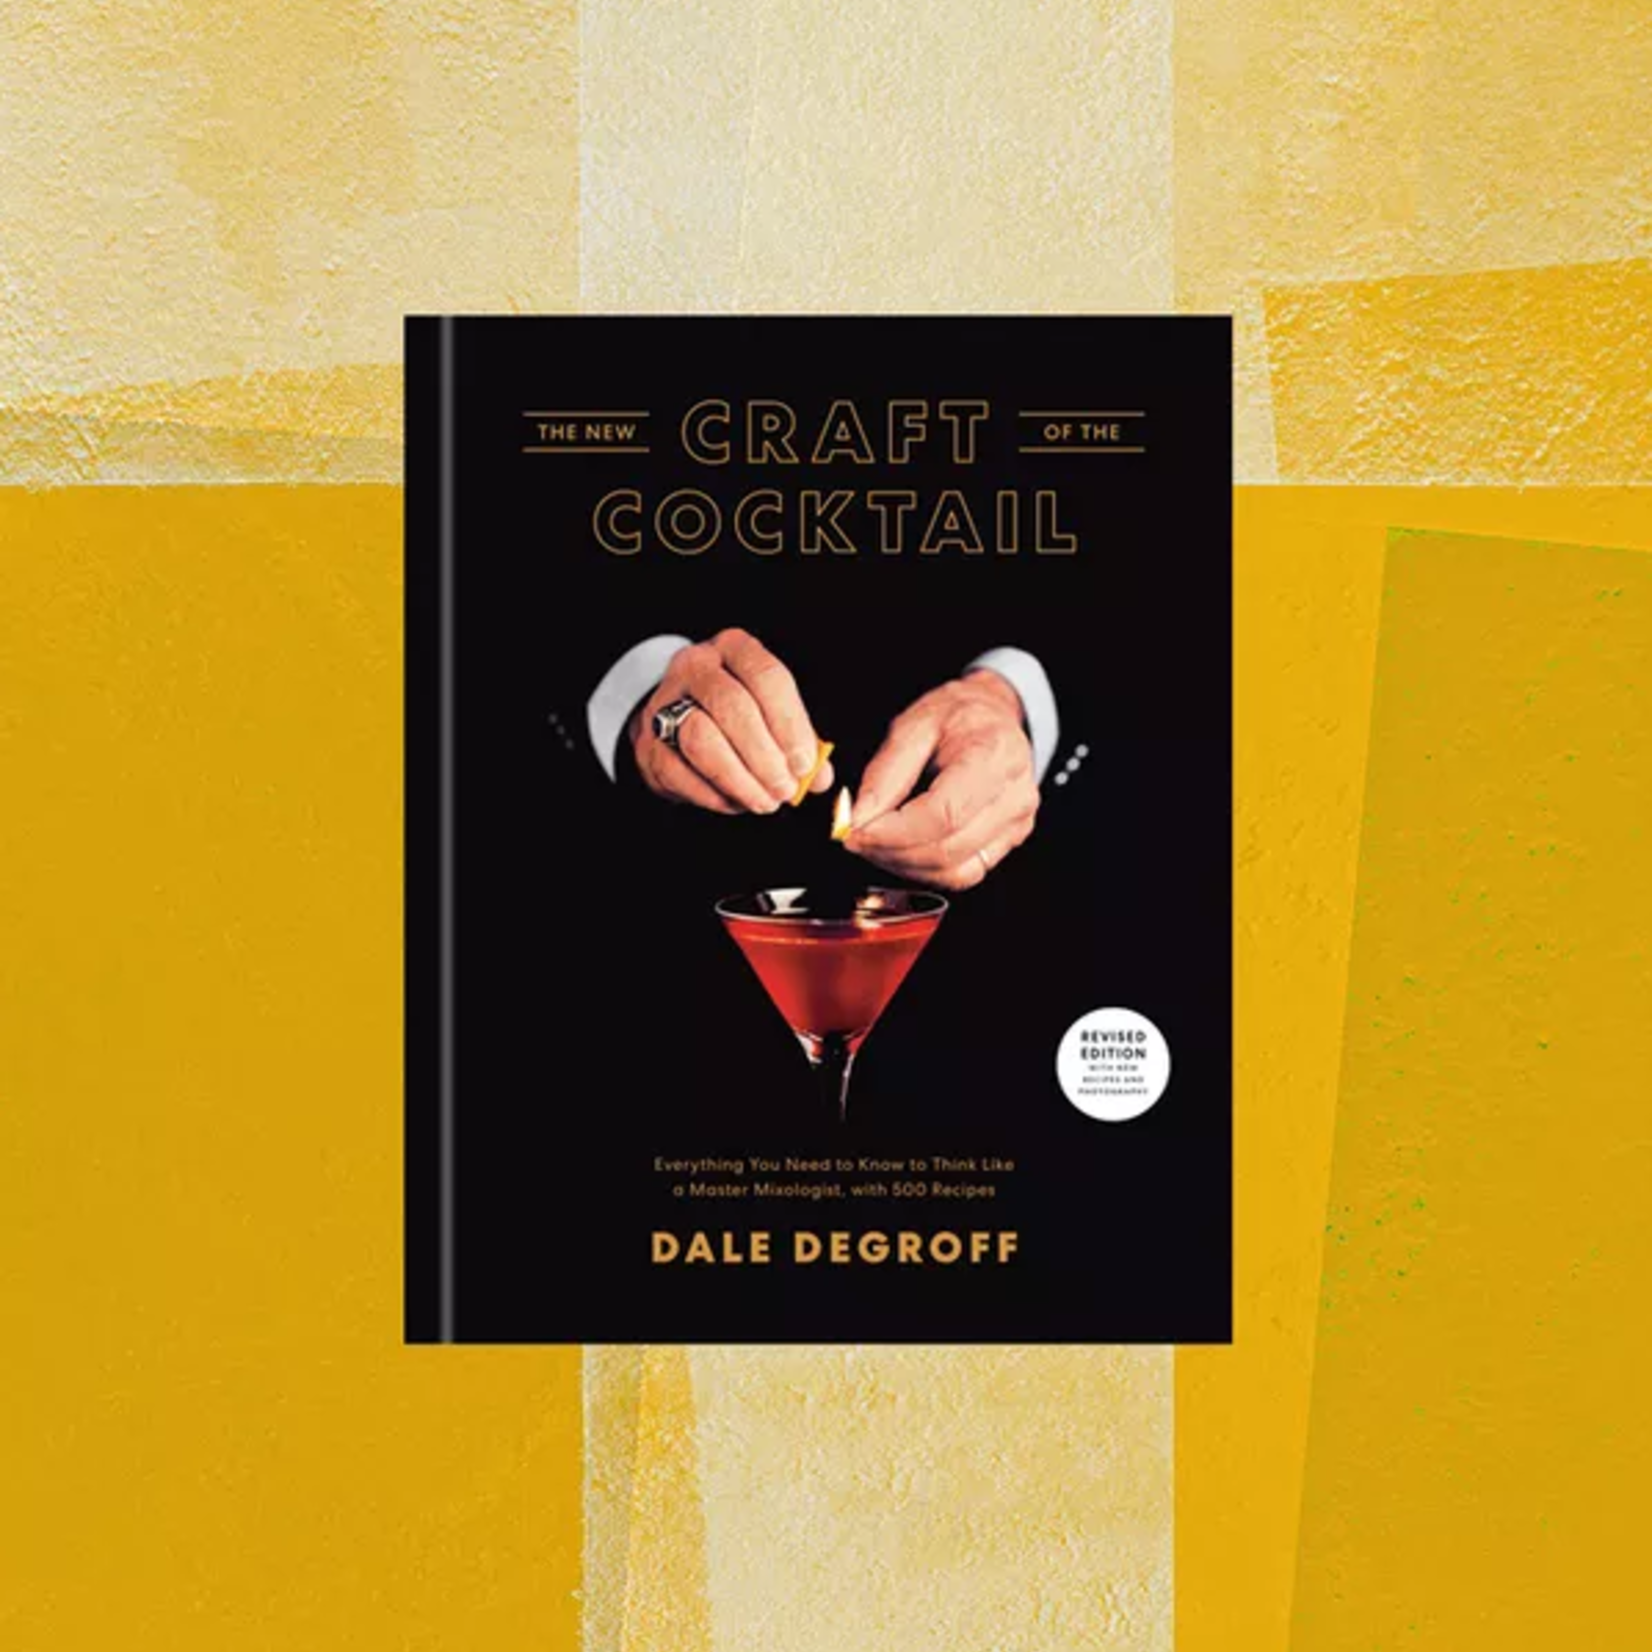 The Craft of the Cocktail: Dale Degroff